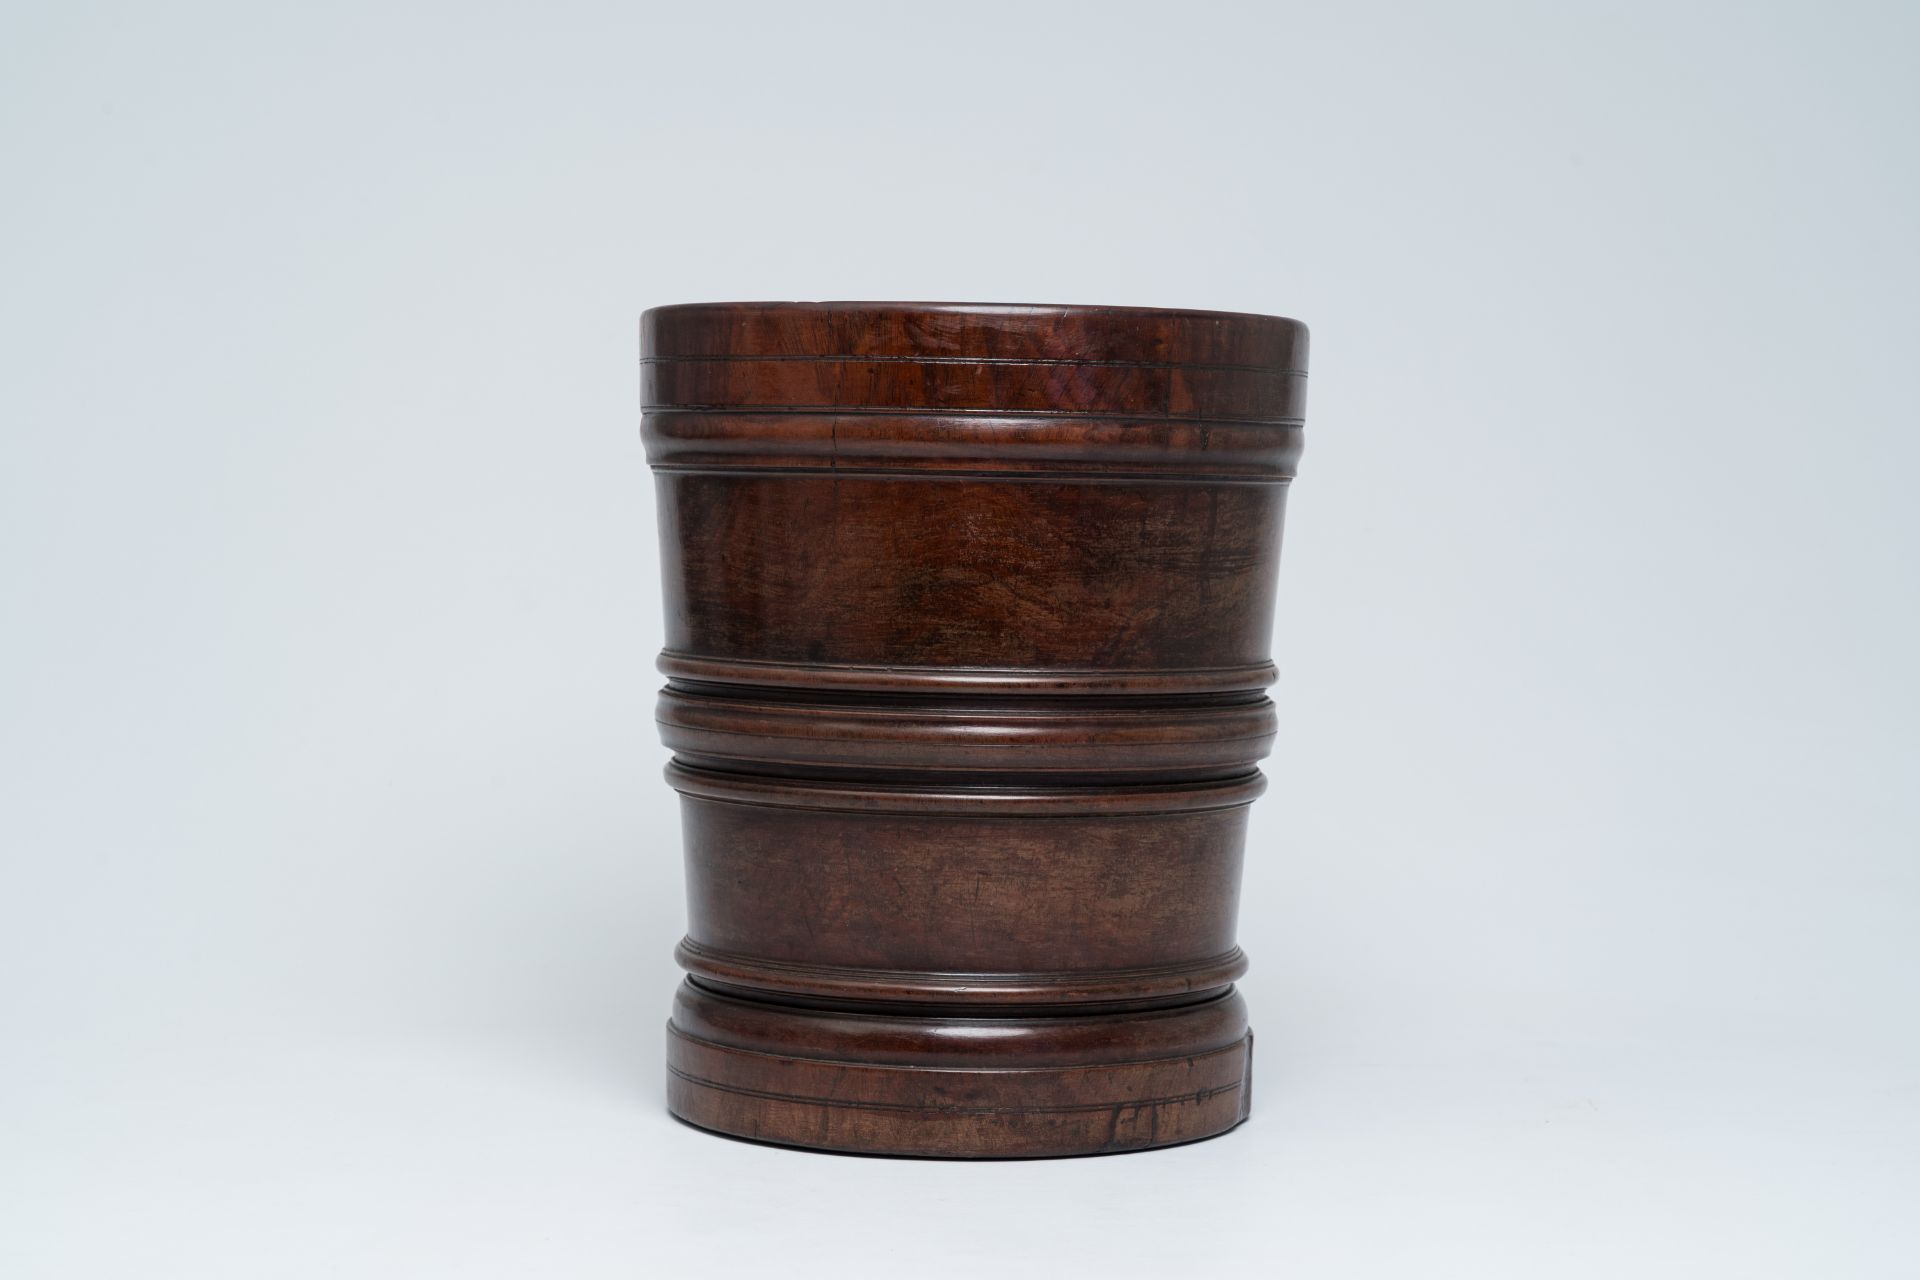 A large English turned wood mortar and pestle, second half 17th C. - Image 6 of 12